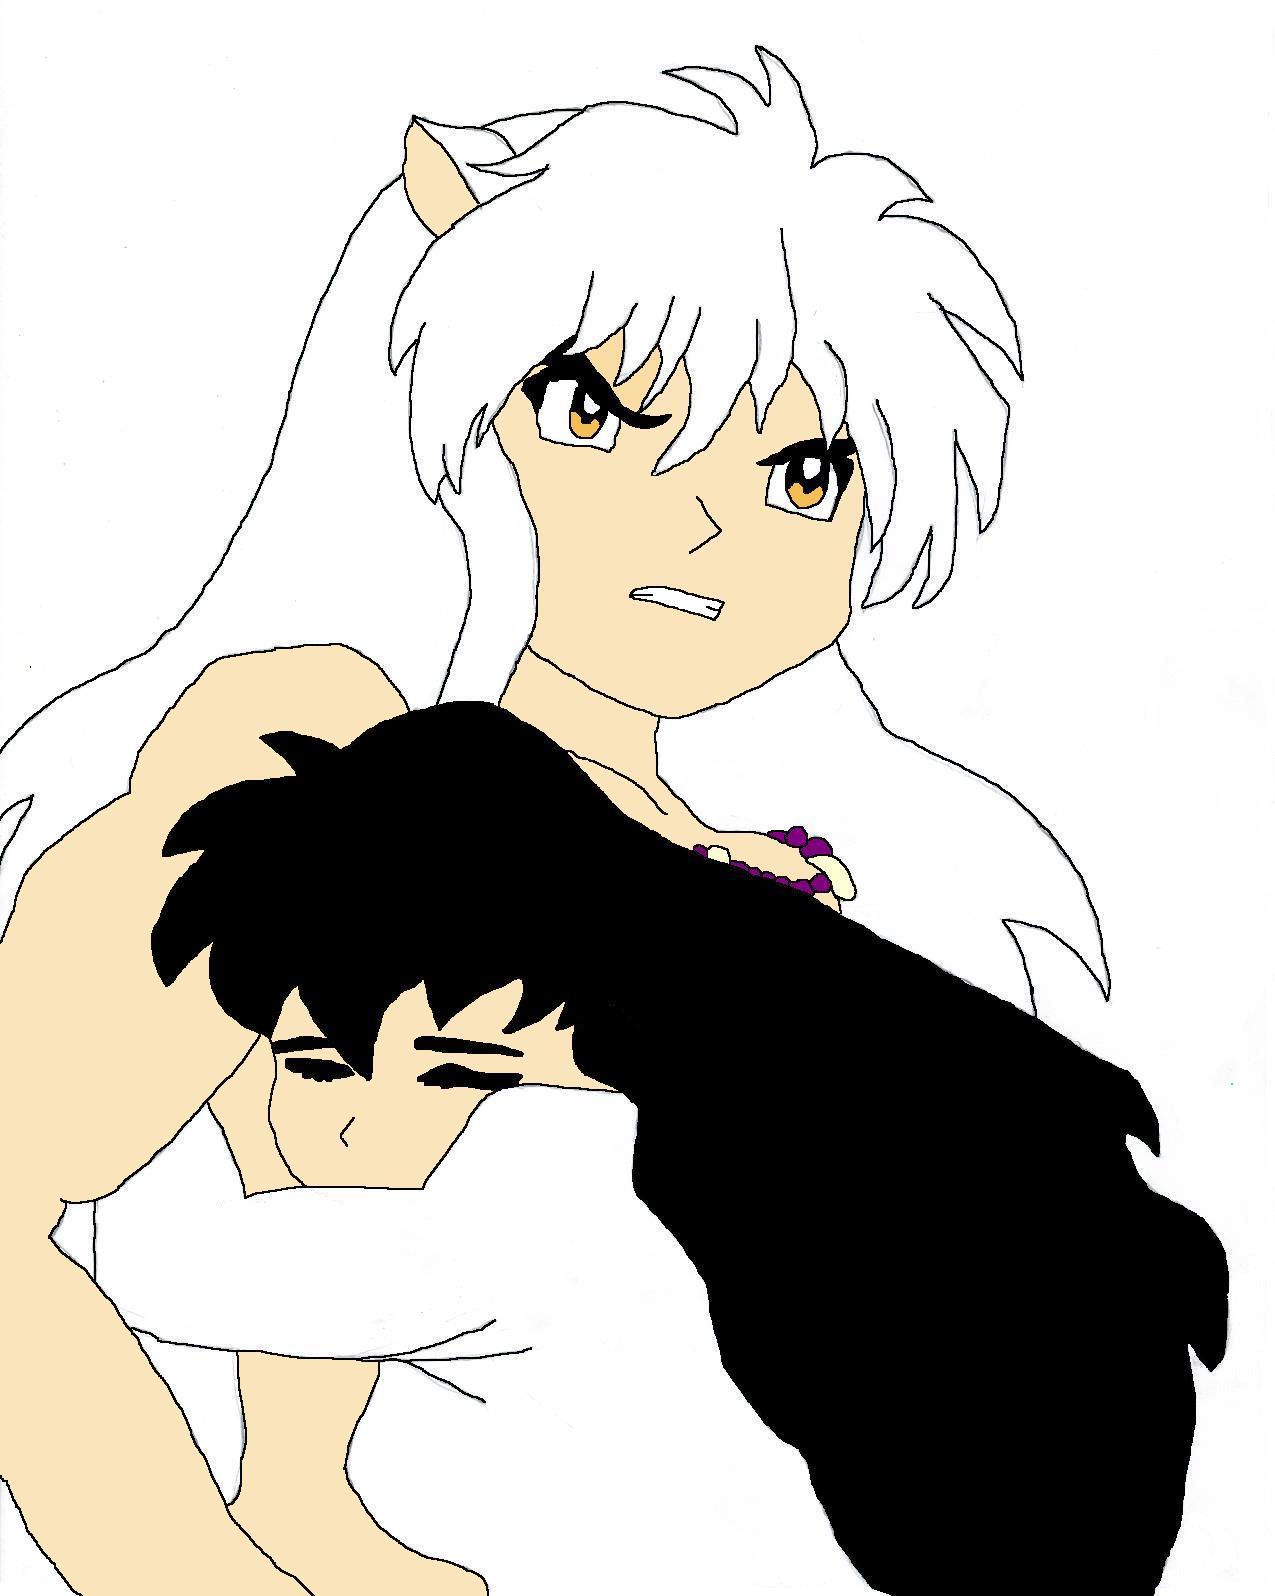 Inuyasha and Kagome (computerized) by FullMetal_D